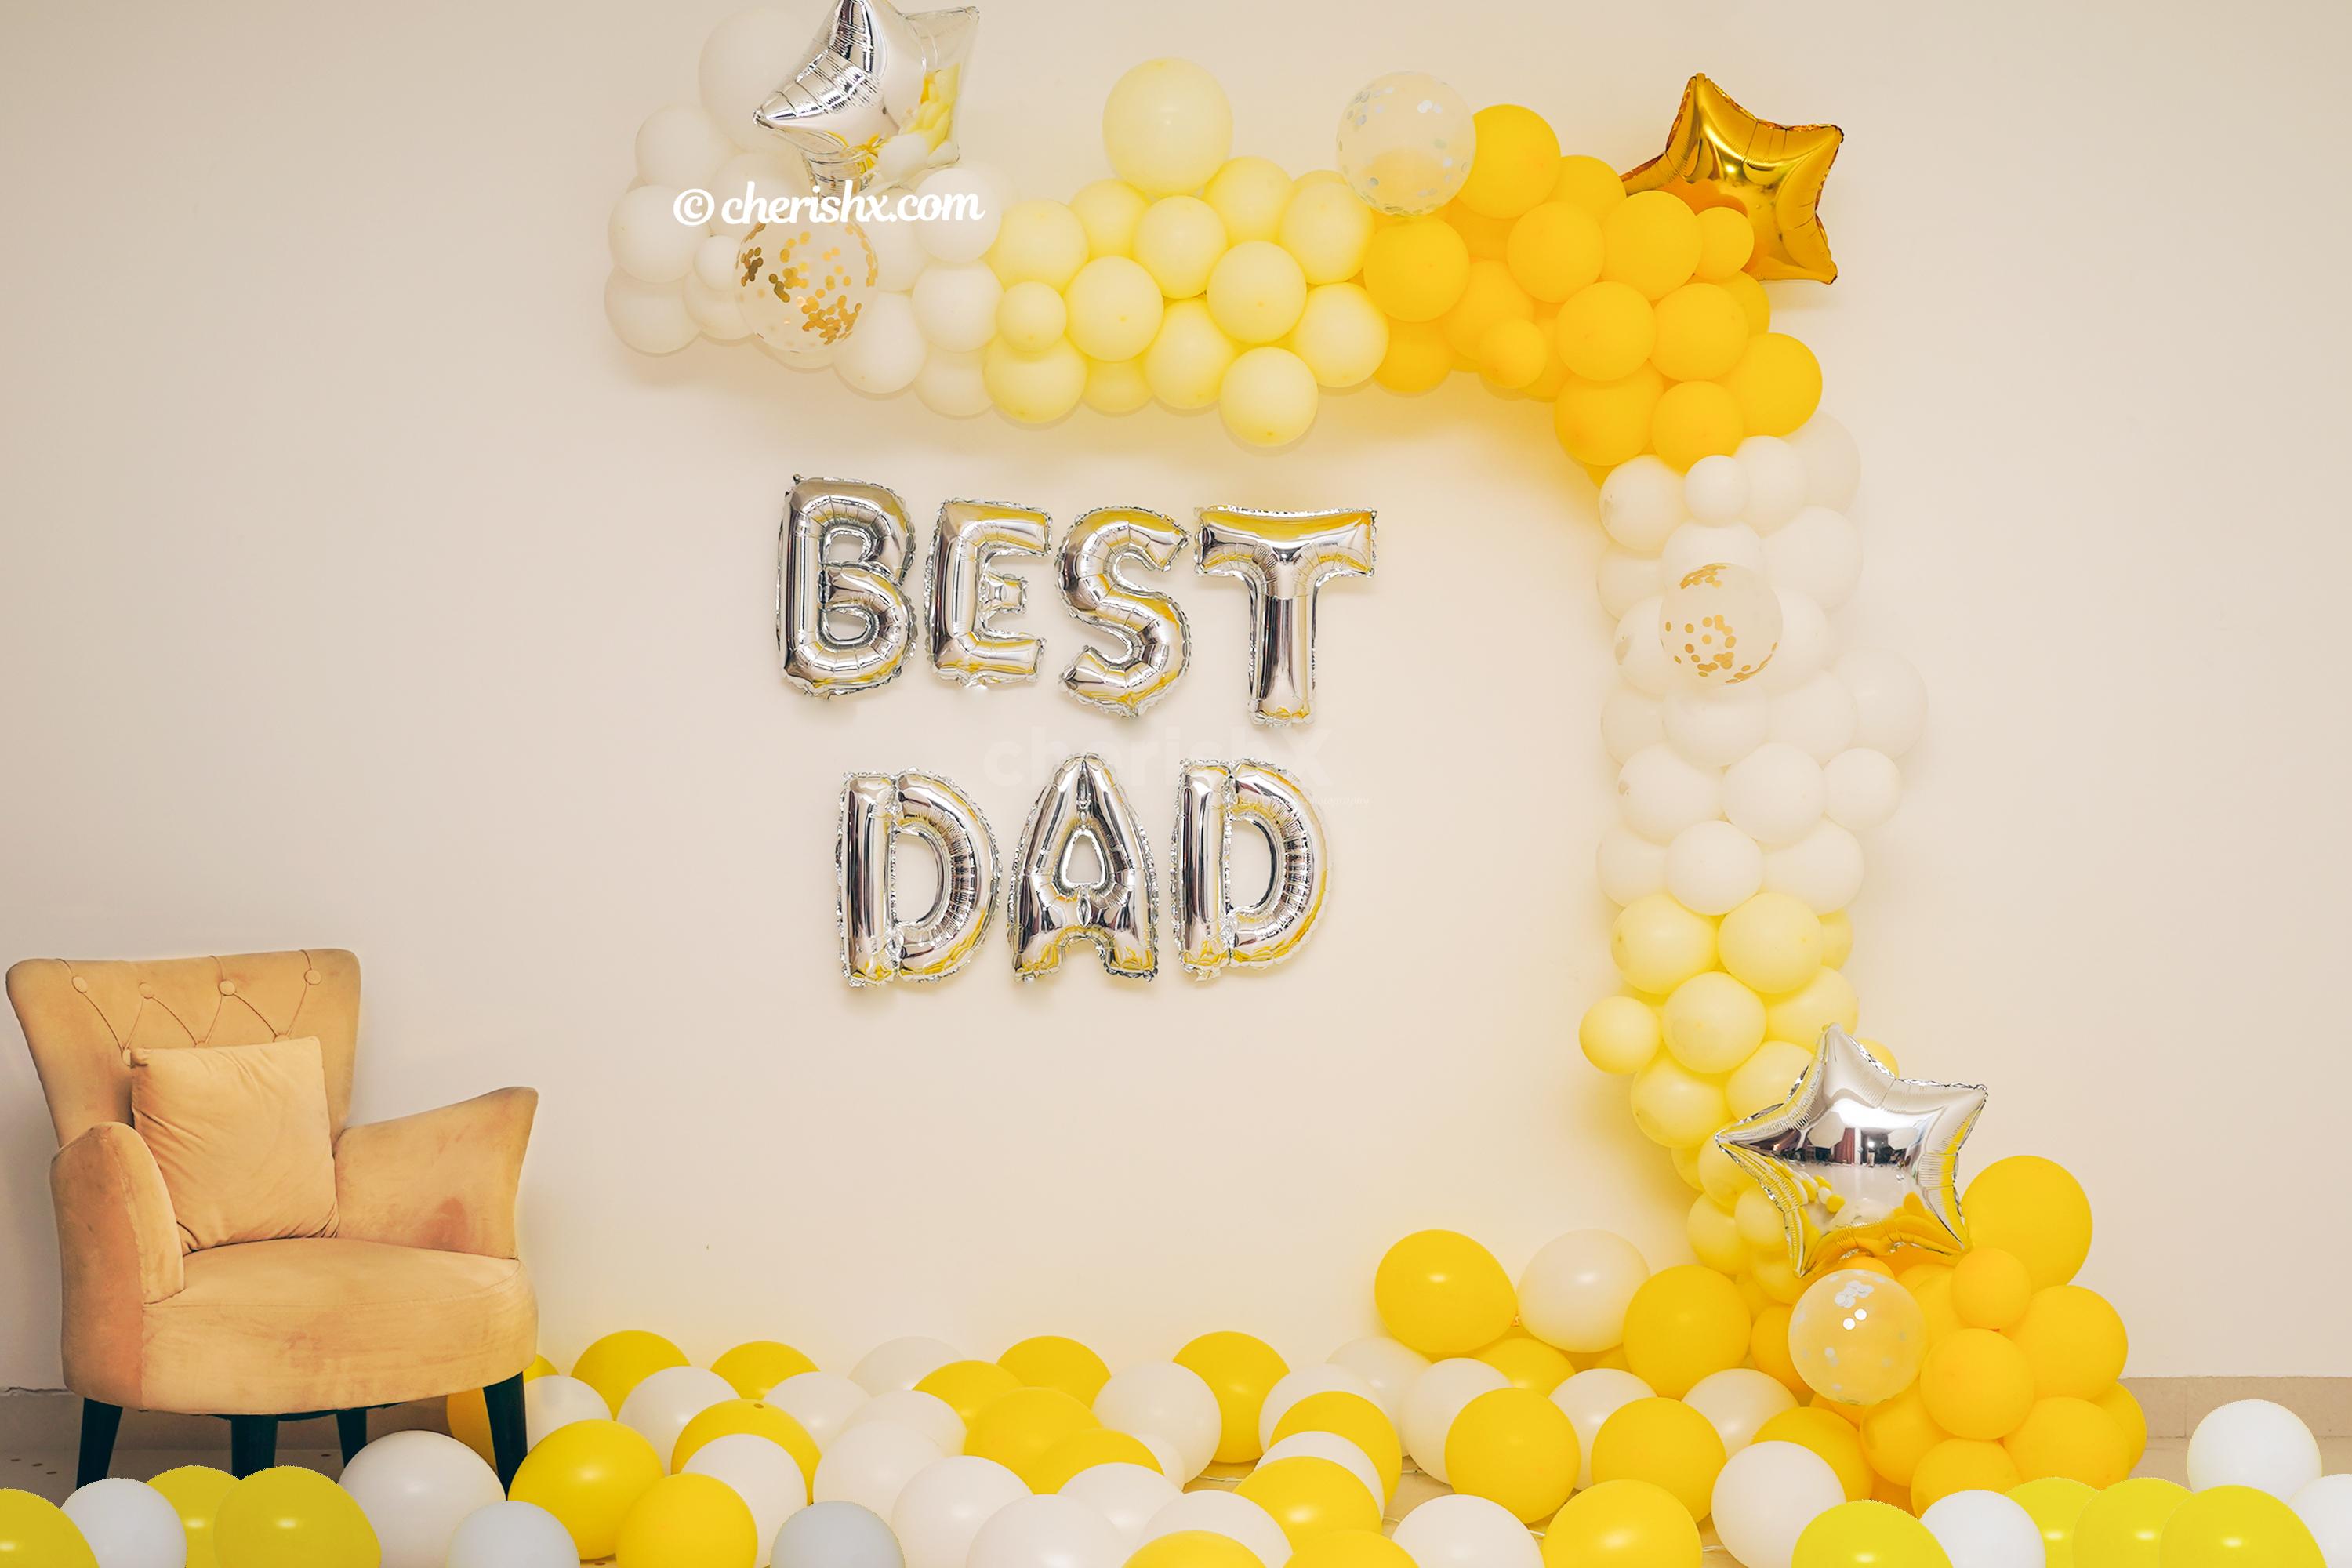 A Charming decoration filled with balloons to surprise your dad in the best way possible.